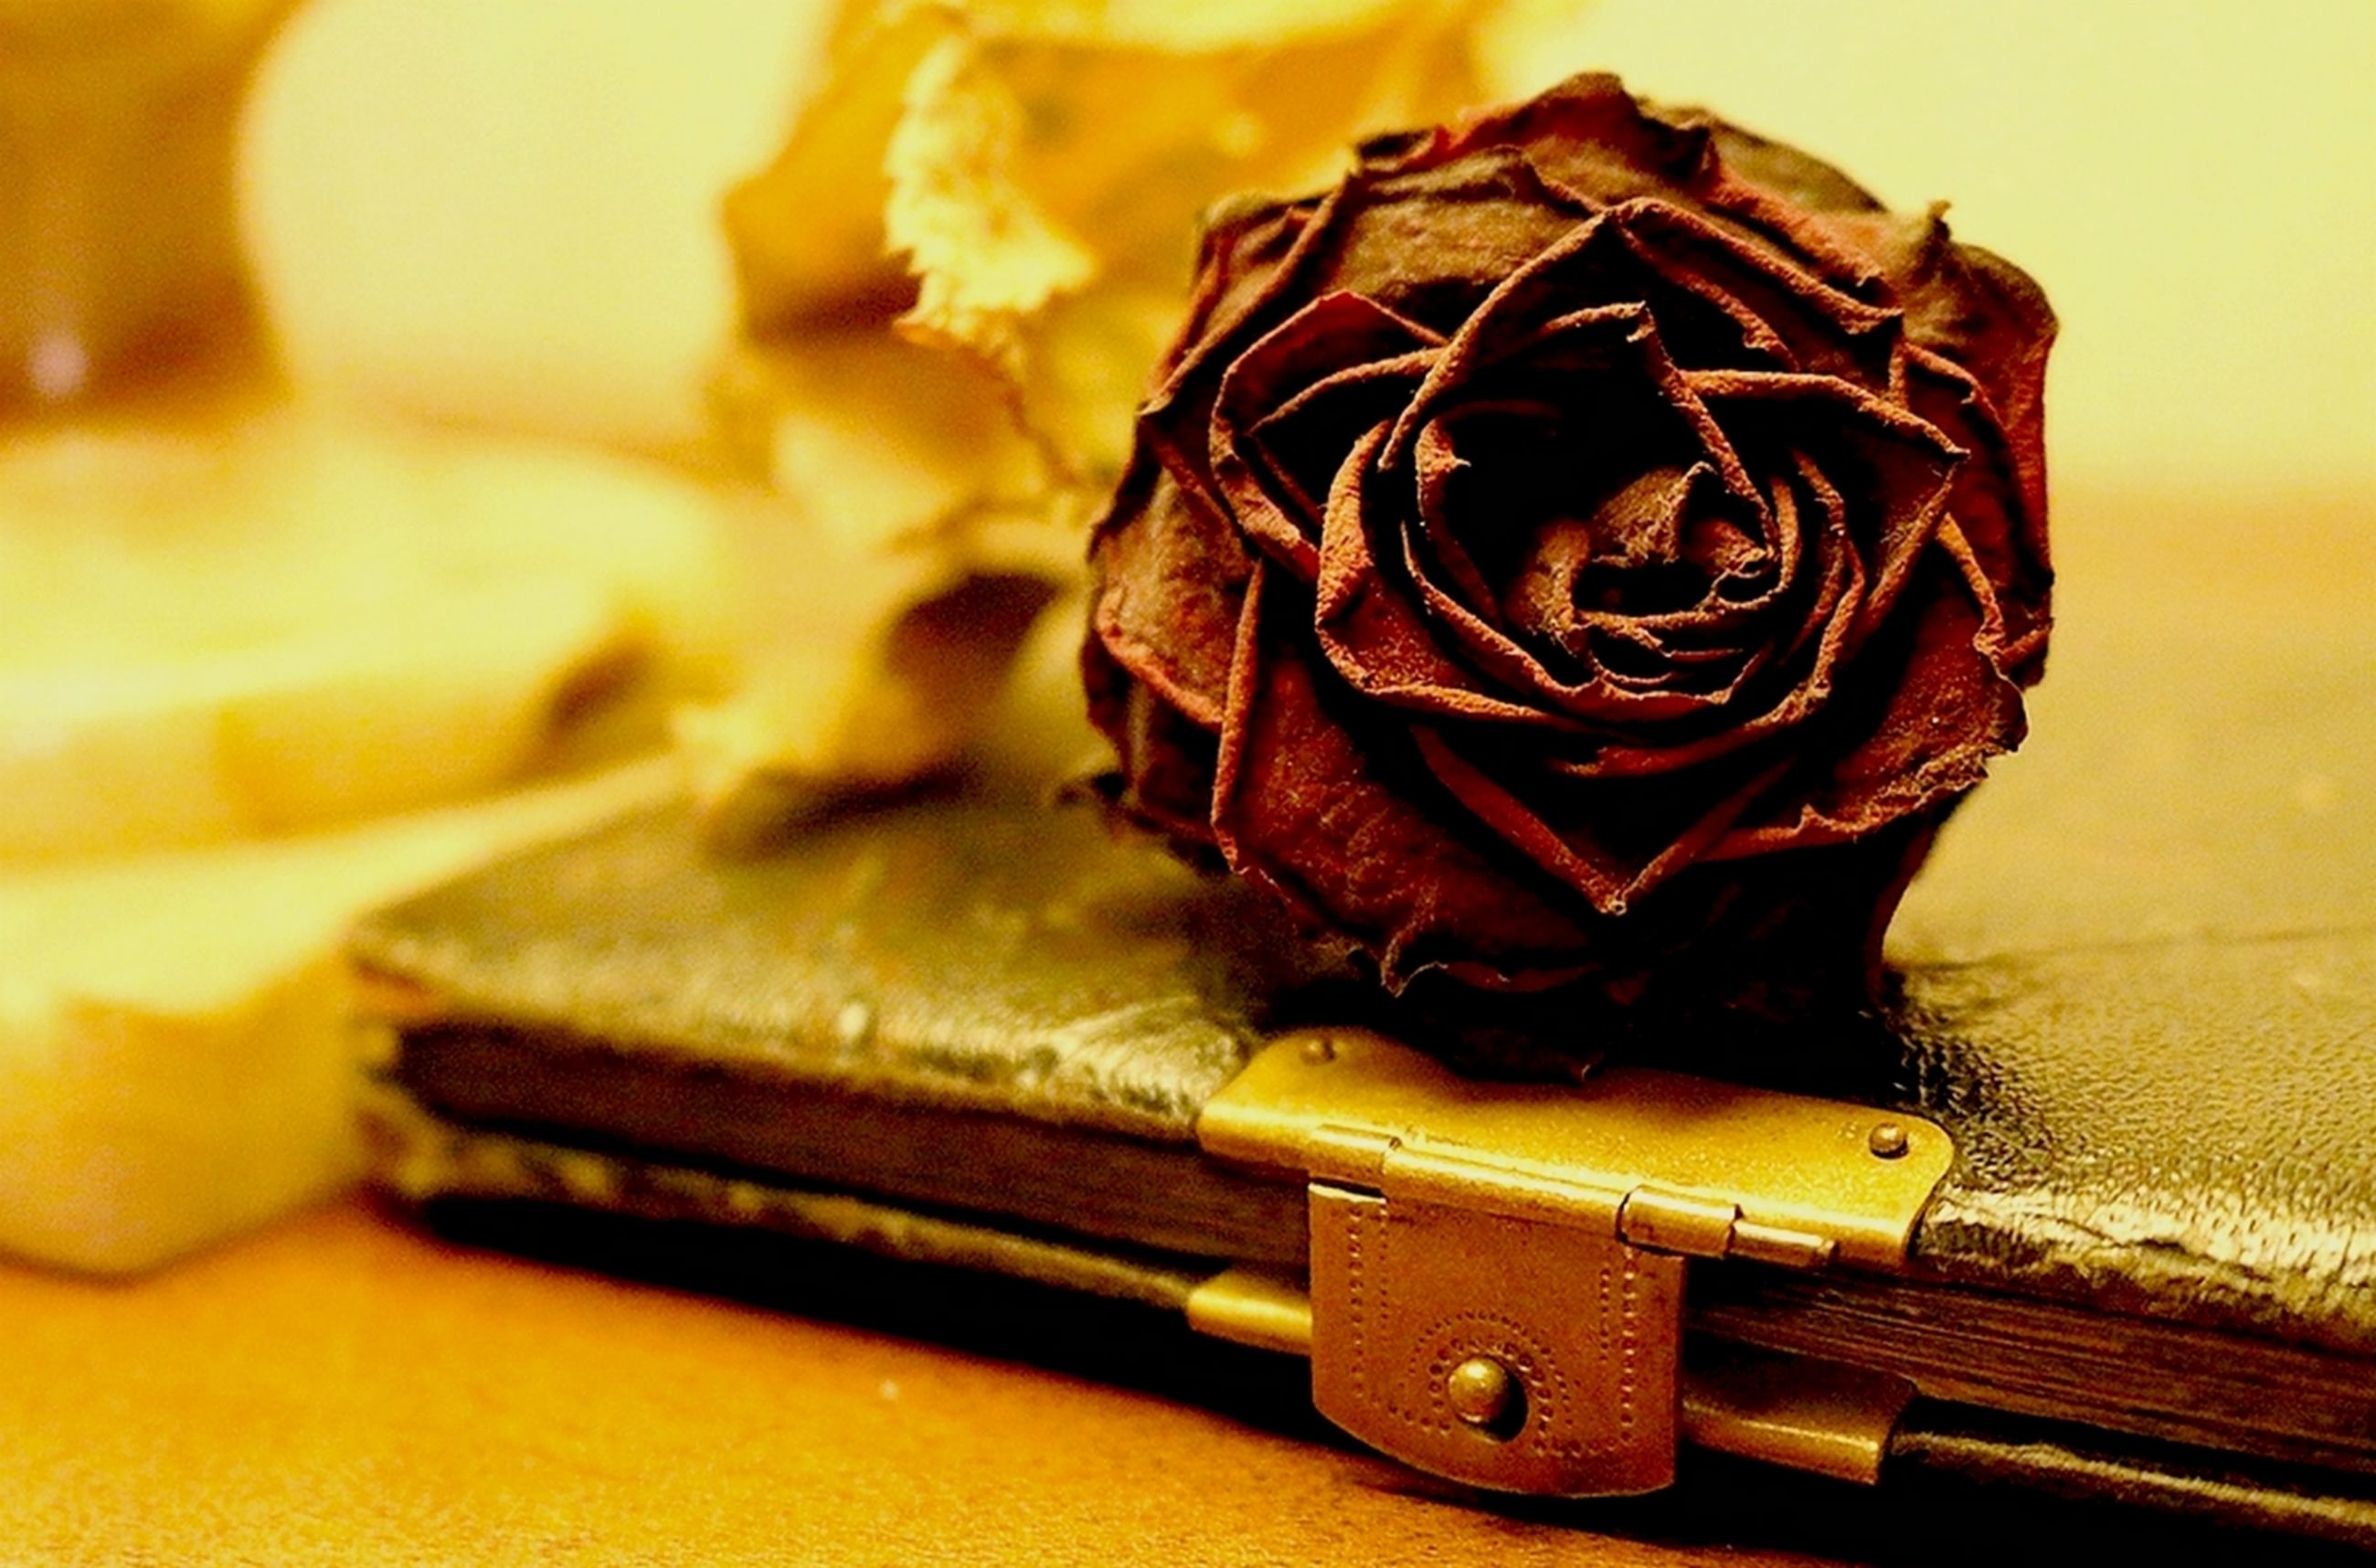 Still life rose and mother's poetry album - Photo by Jens Schommer